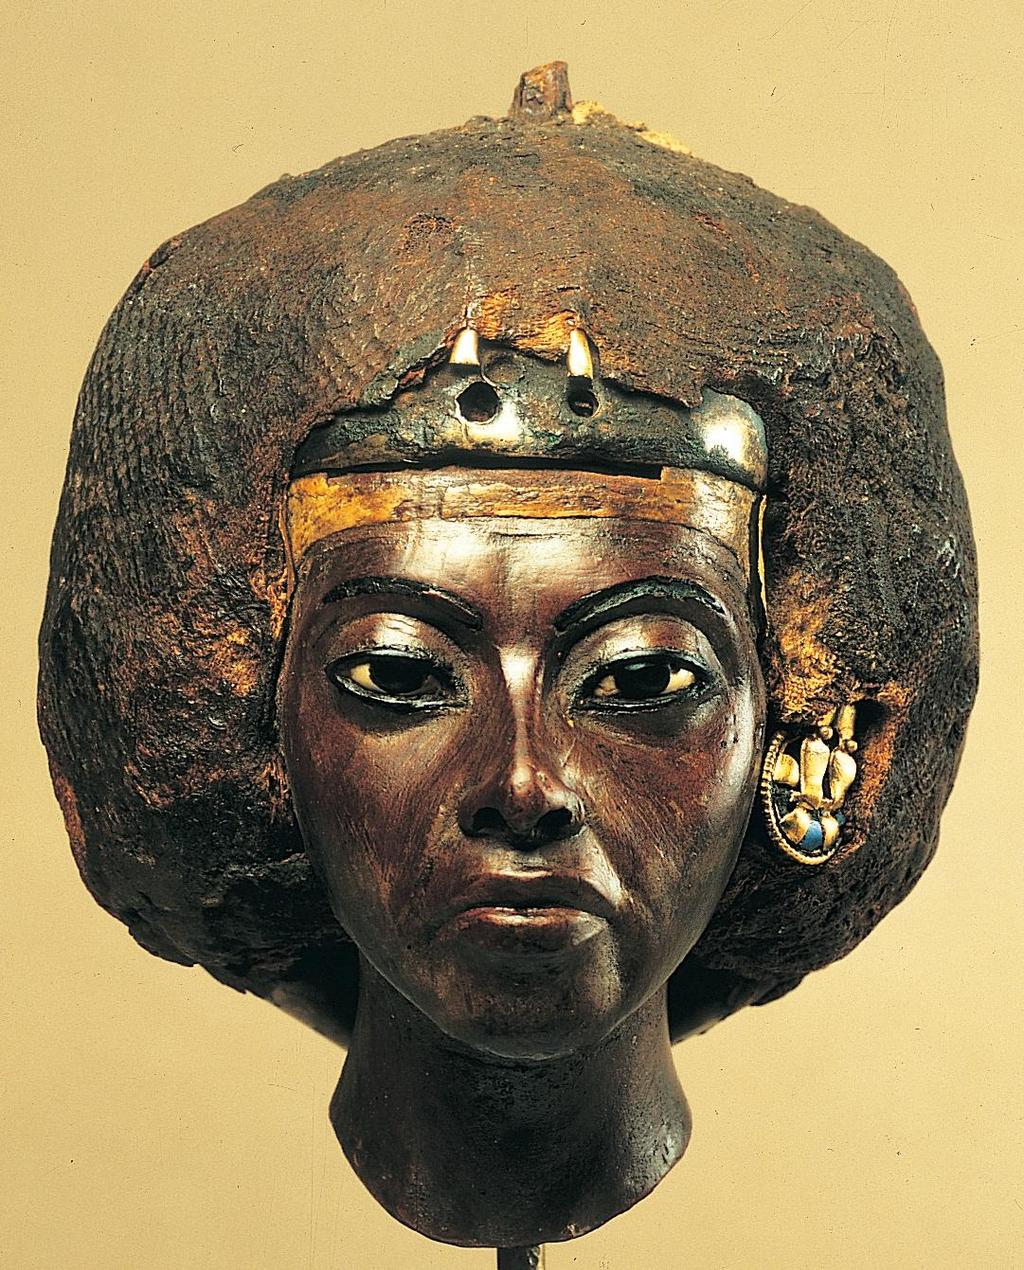 Tiye, from Ghurah, Egypt 18th Dynasty. ca 1353-1335 BCE Wood with gold, silver, alabaster, and lapis lazuli, Burlin CONTEXT : King Akhenaten's Mom. Most of really loved her.